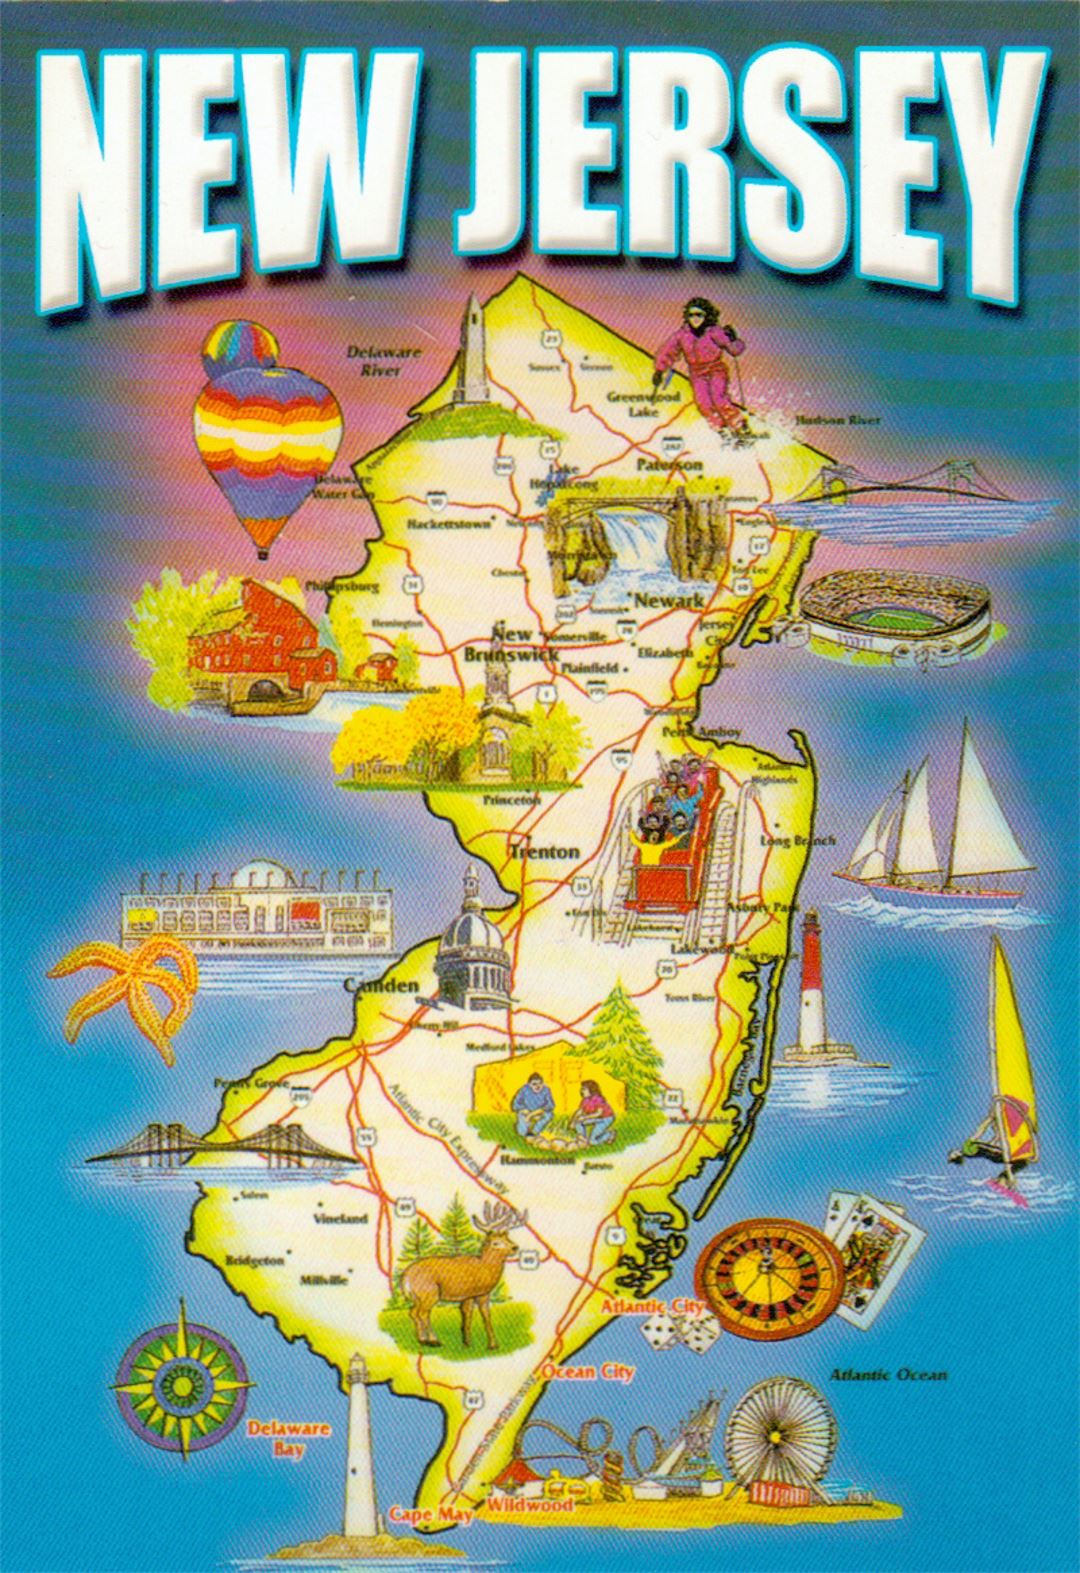 Detailed tourist map of New Jersey state